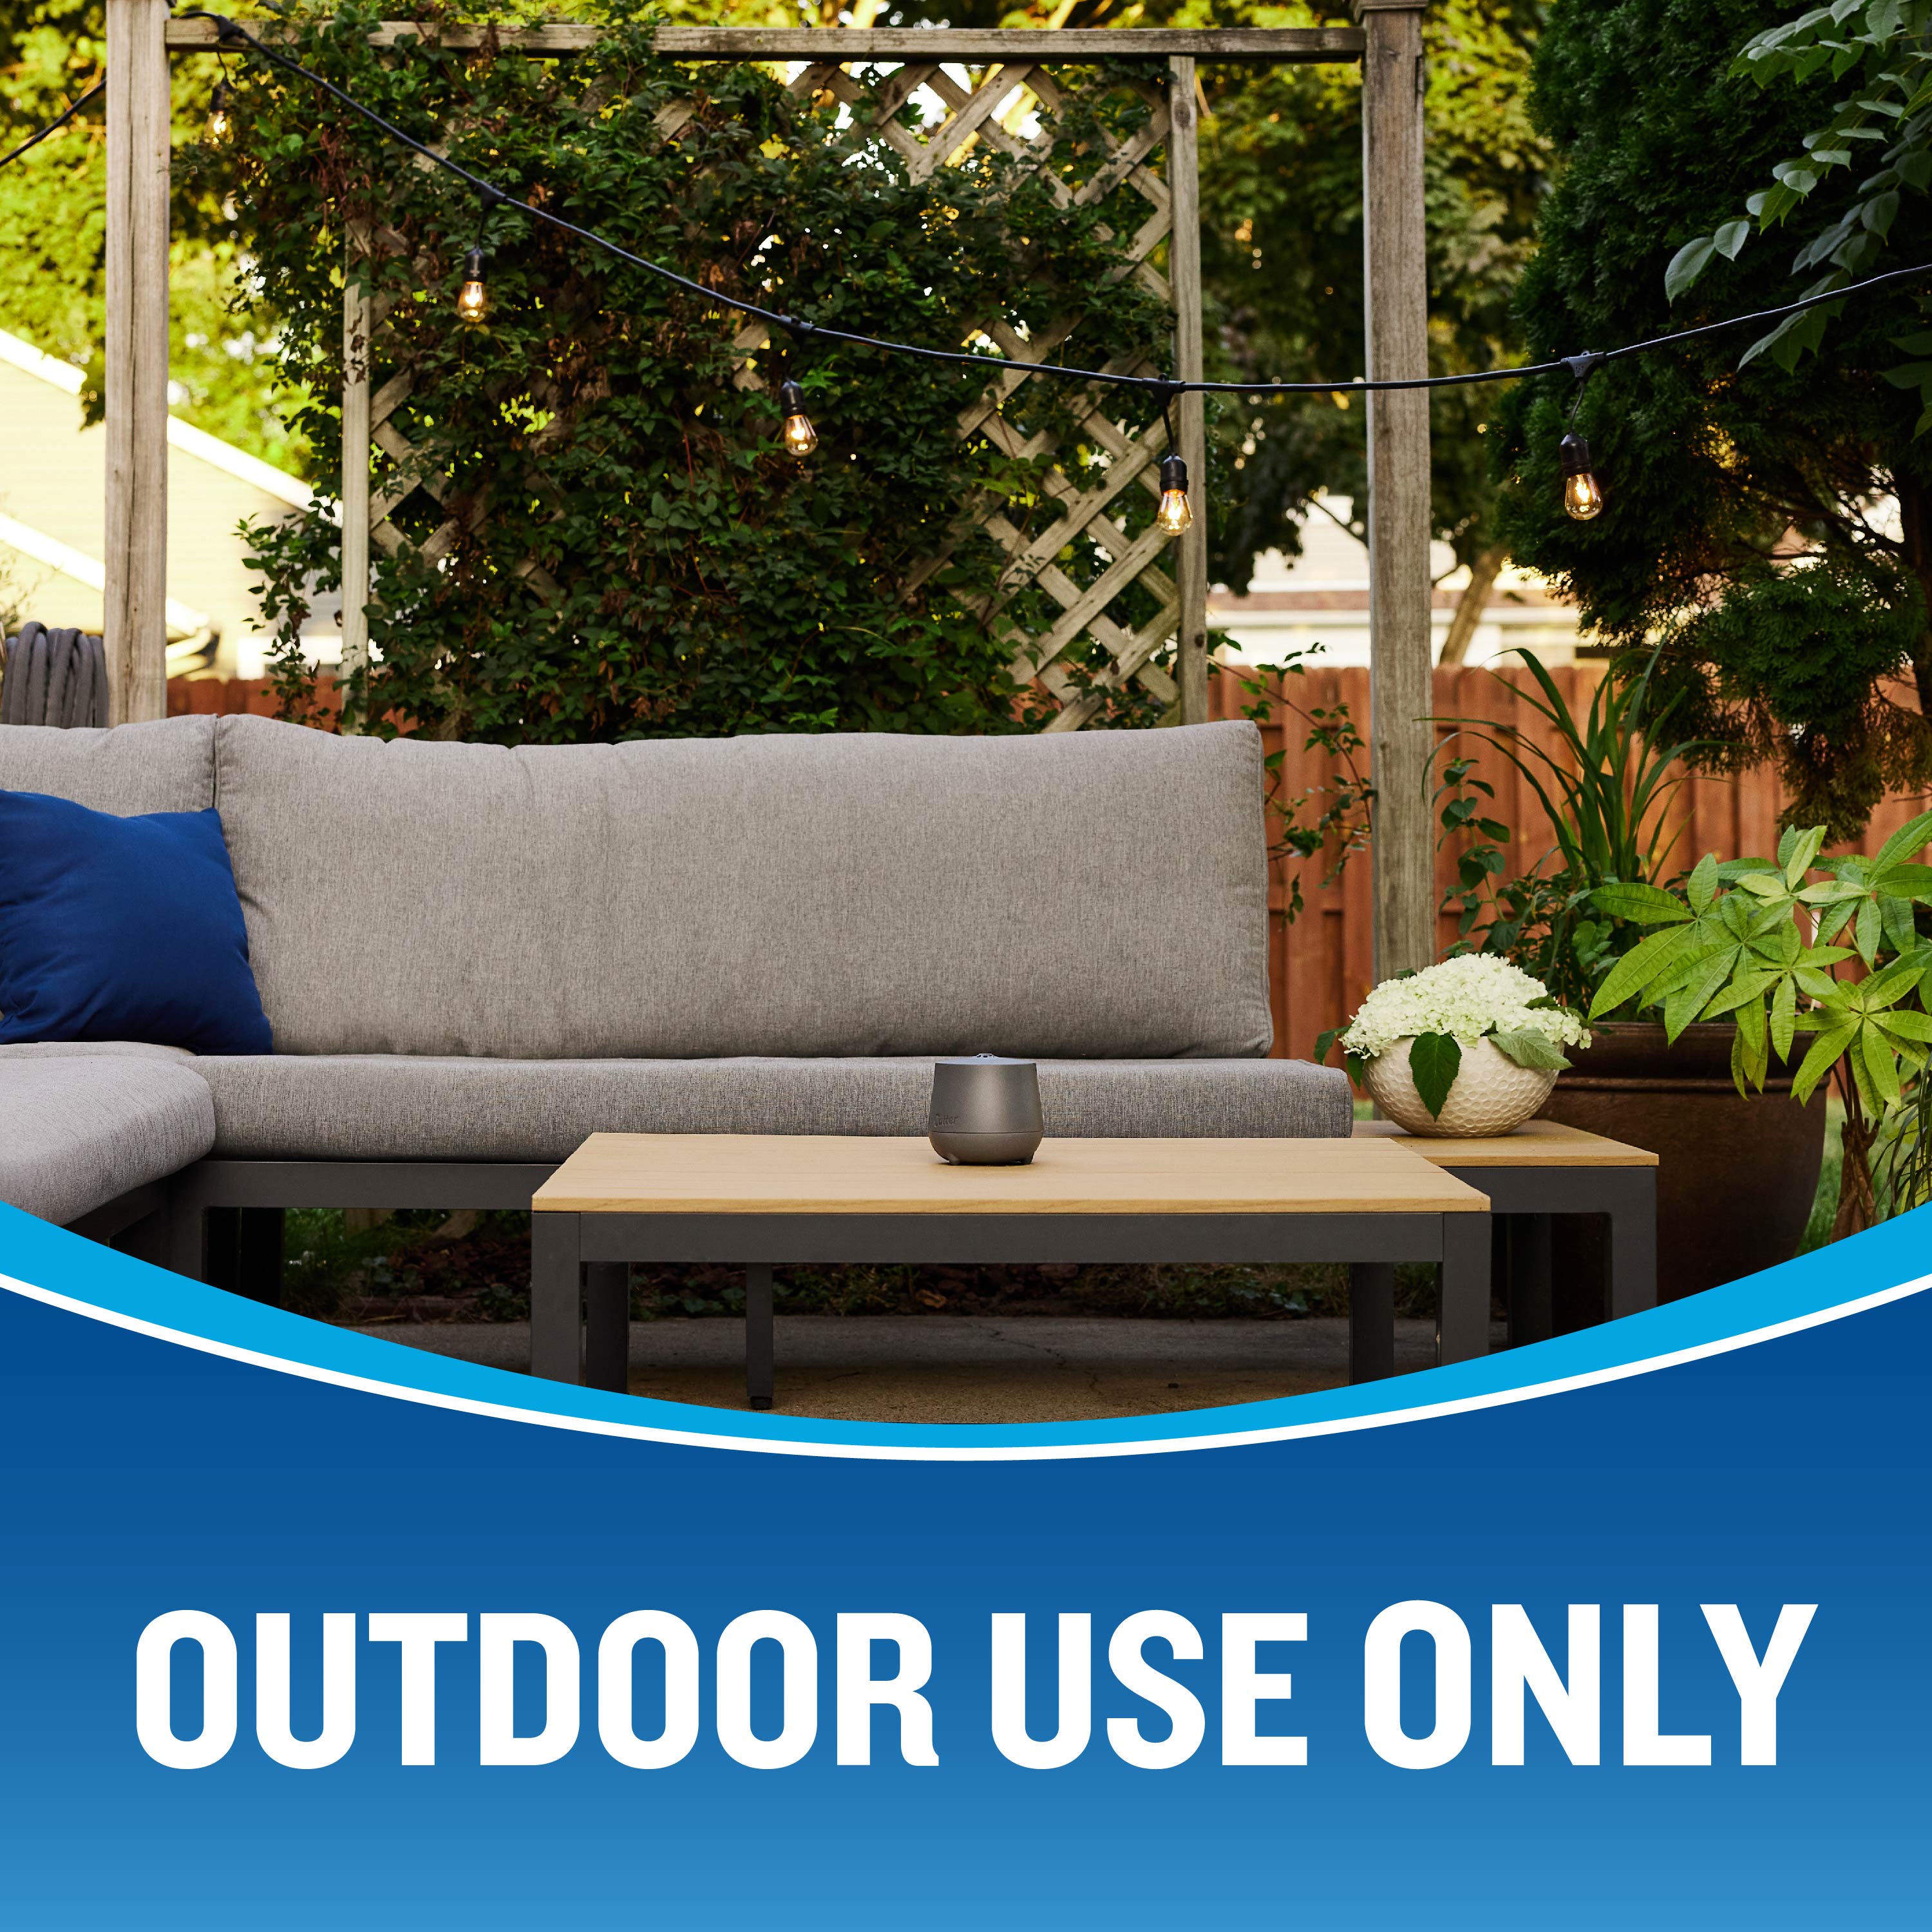 Eclipse™ Zone Mosquito Repellent Outdoor Device - Outdoor Use Only